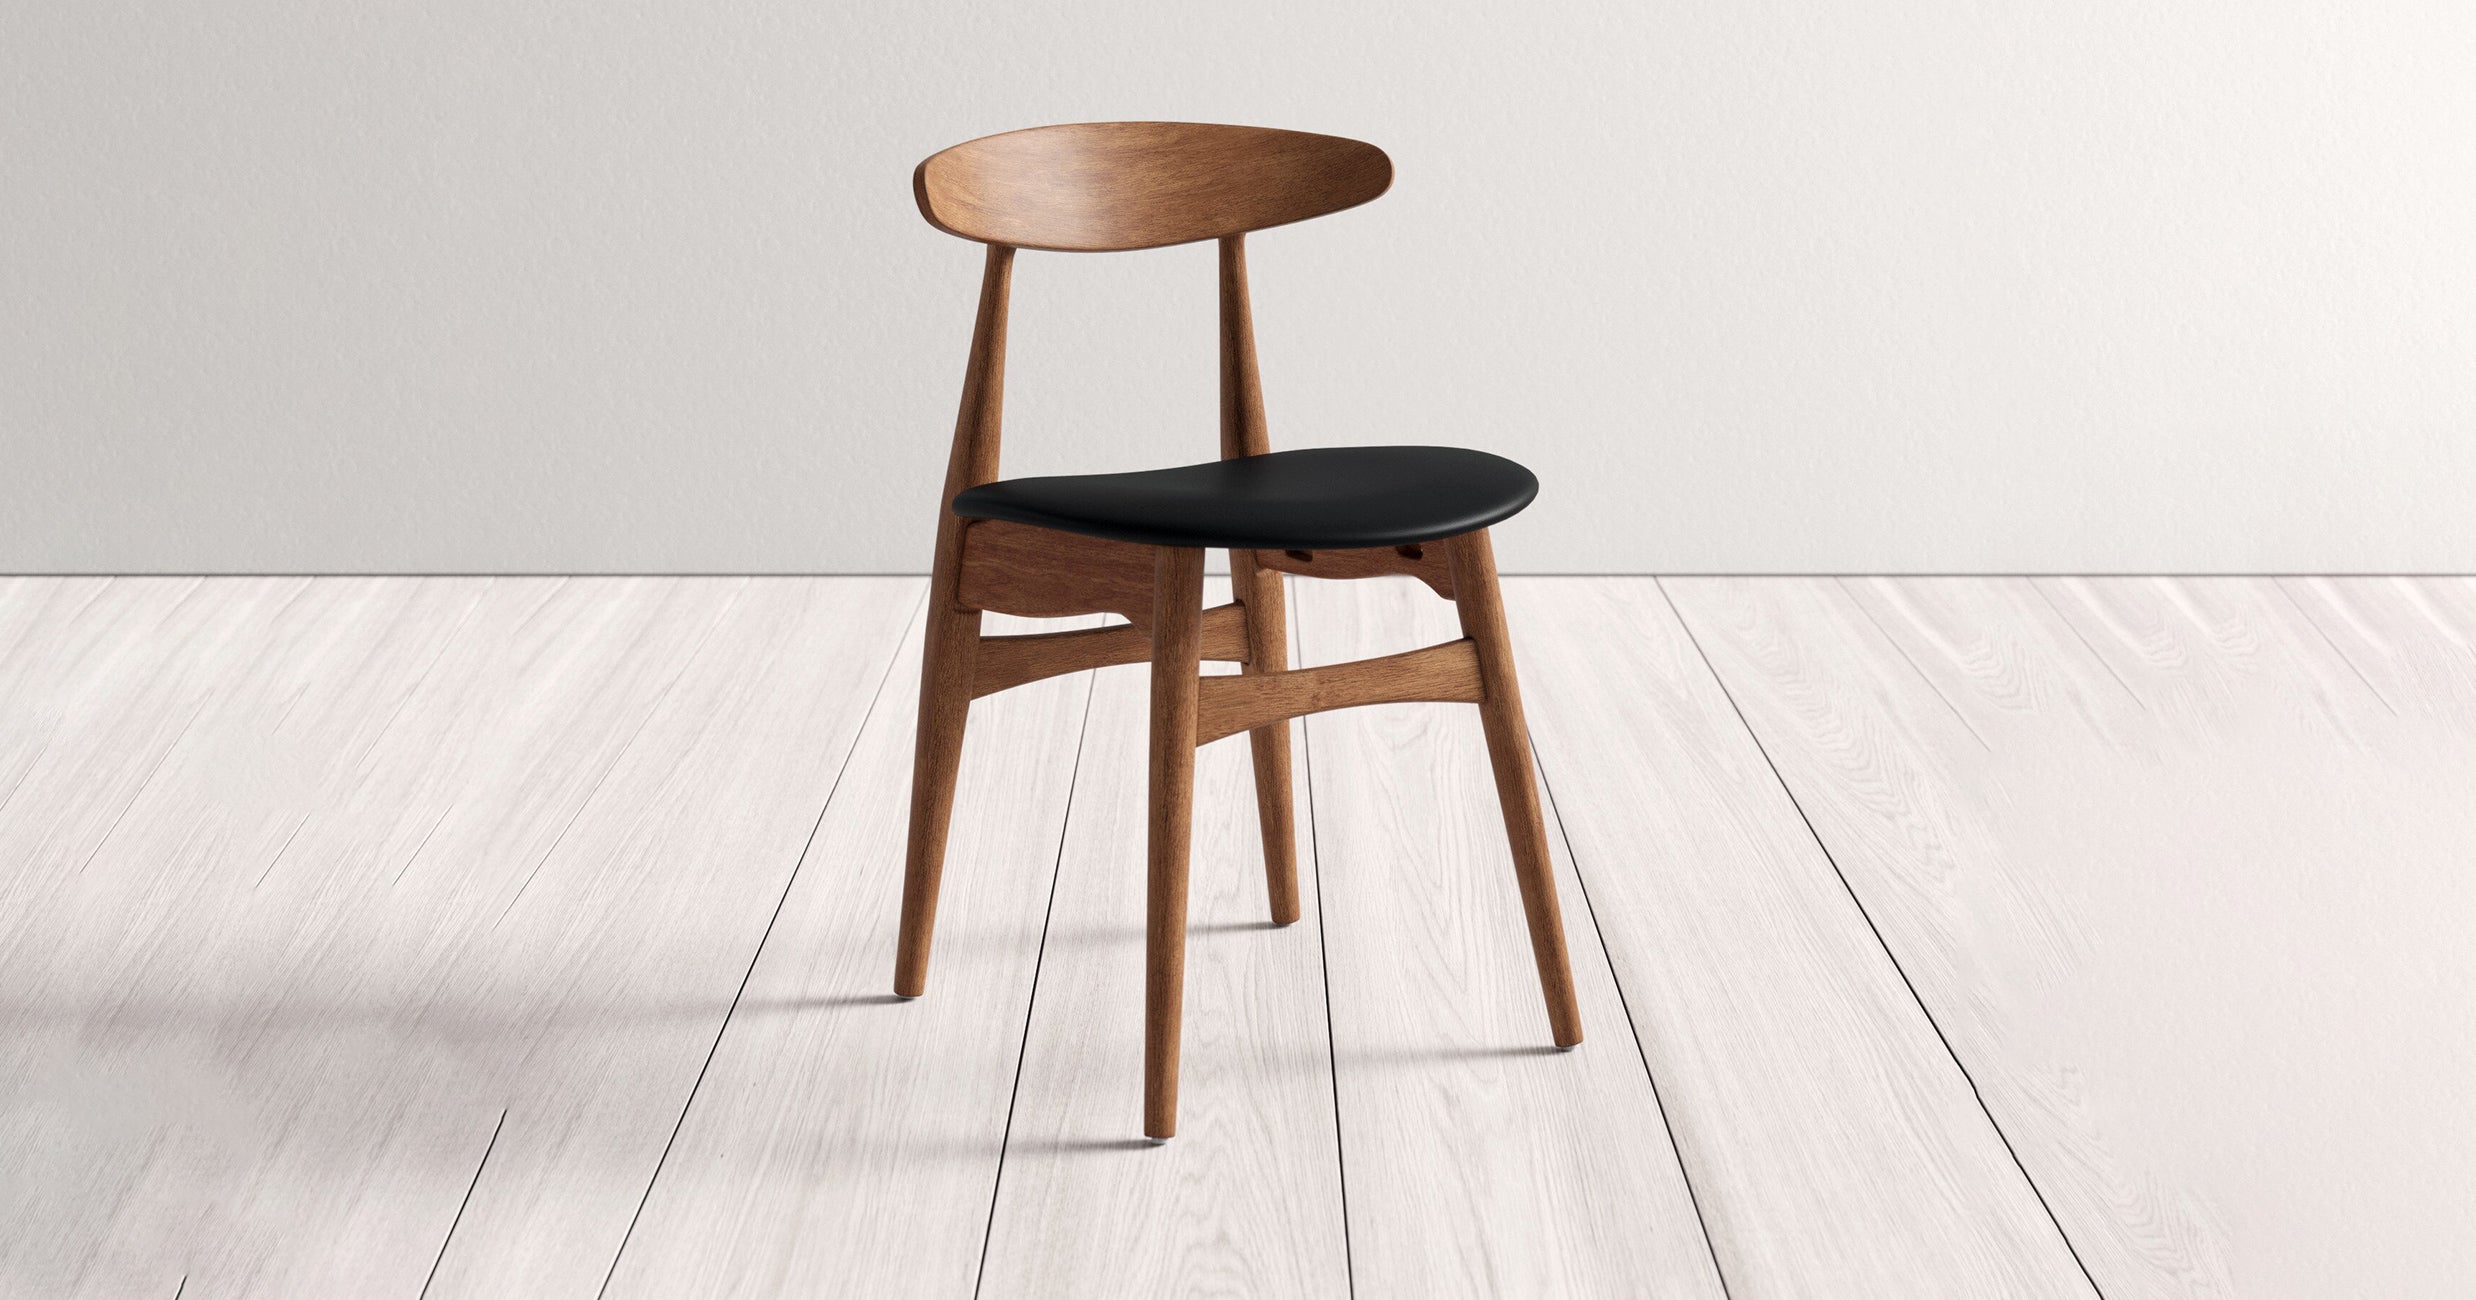 9 Best Dining Chairs 2021, What Are The Most Comfortable Dining Chairs